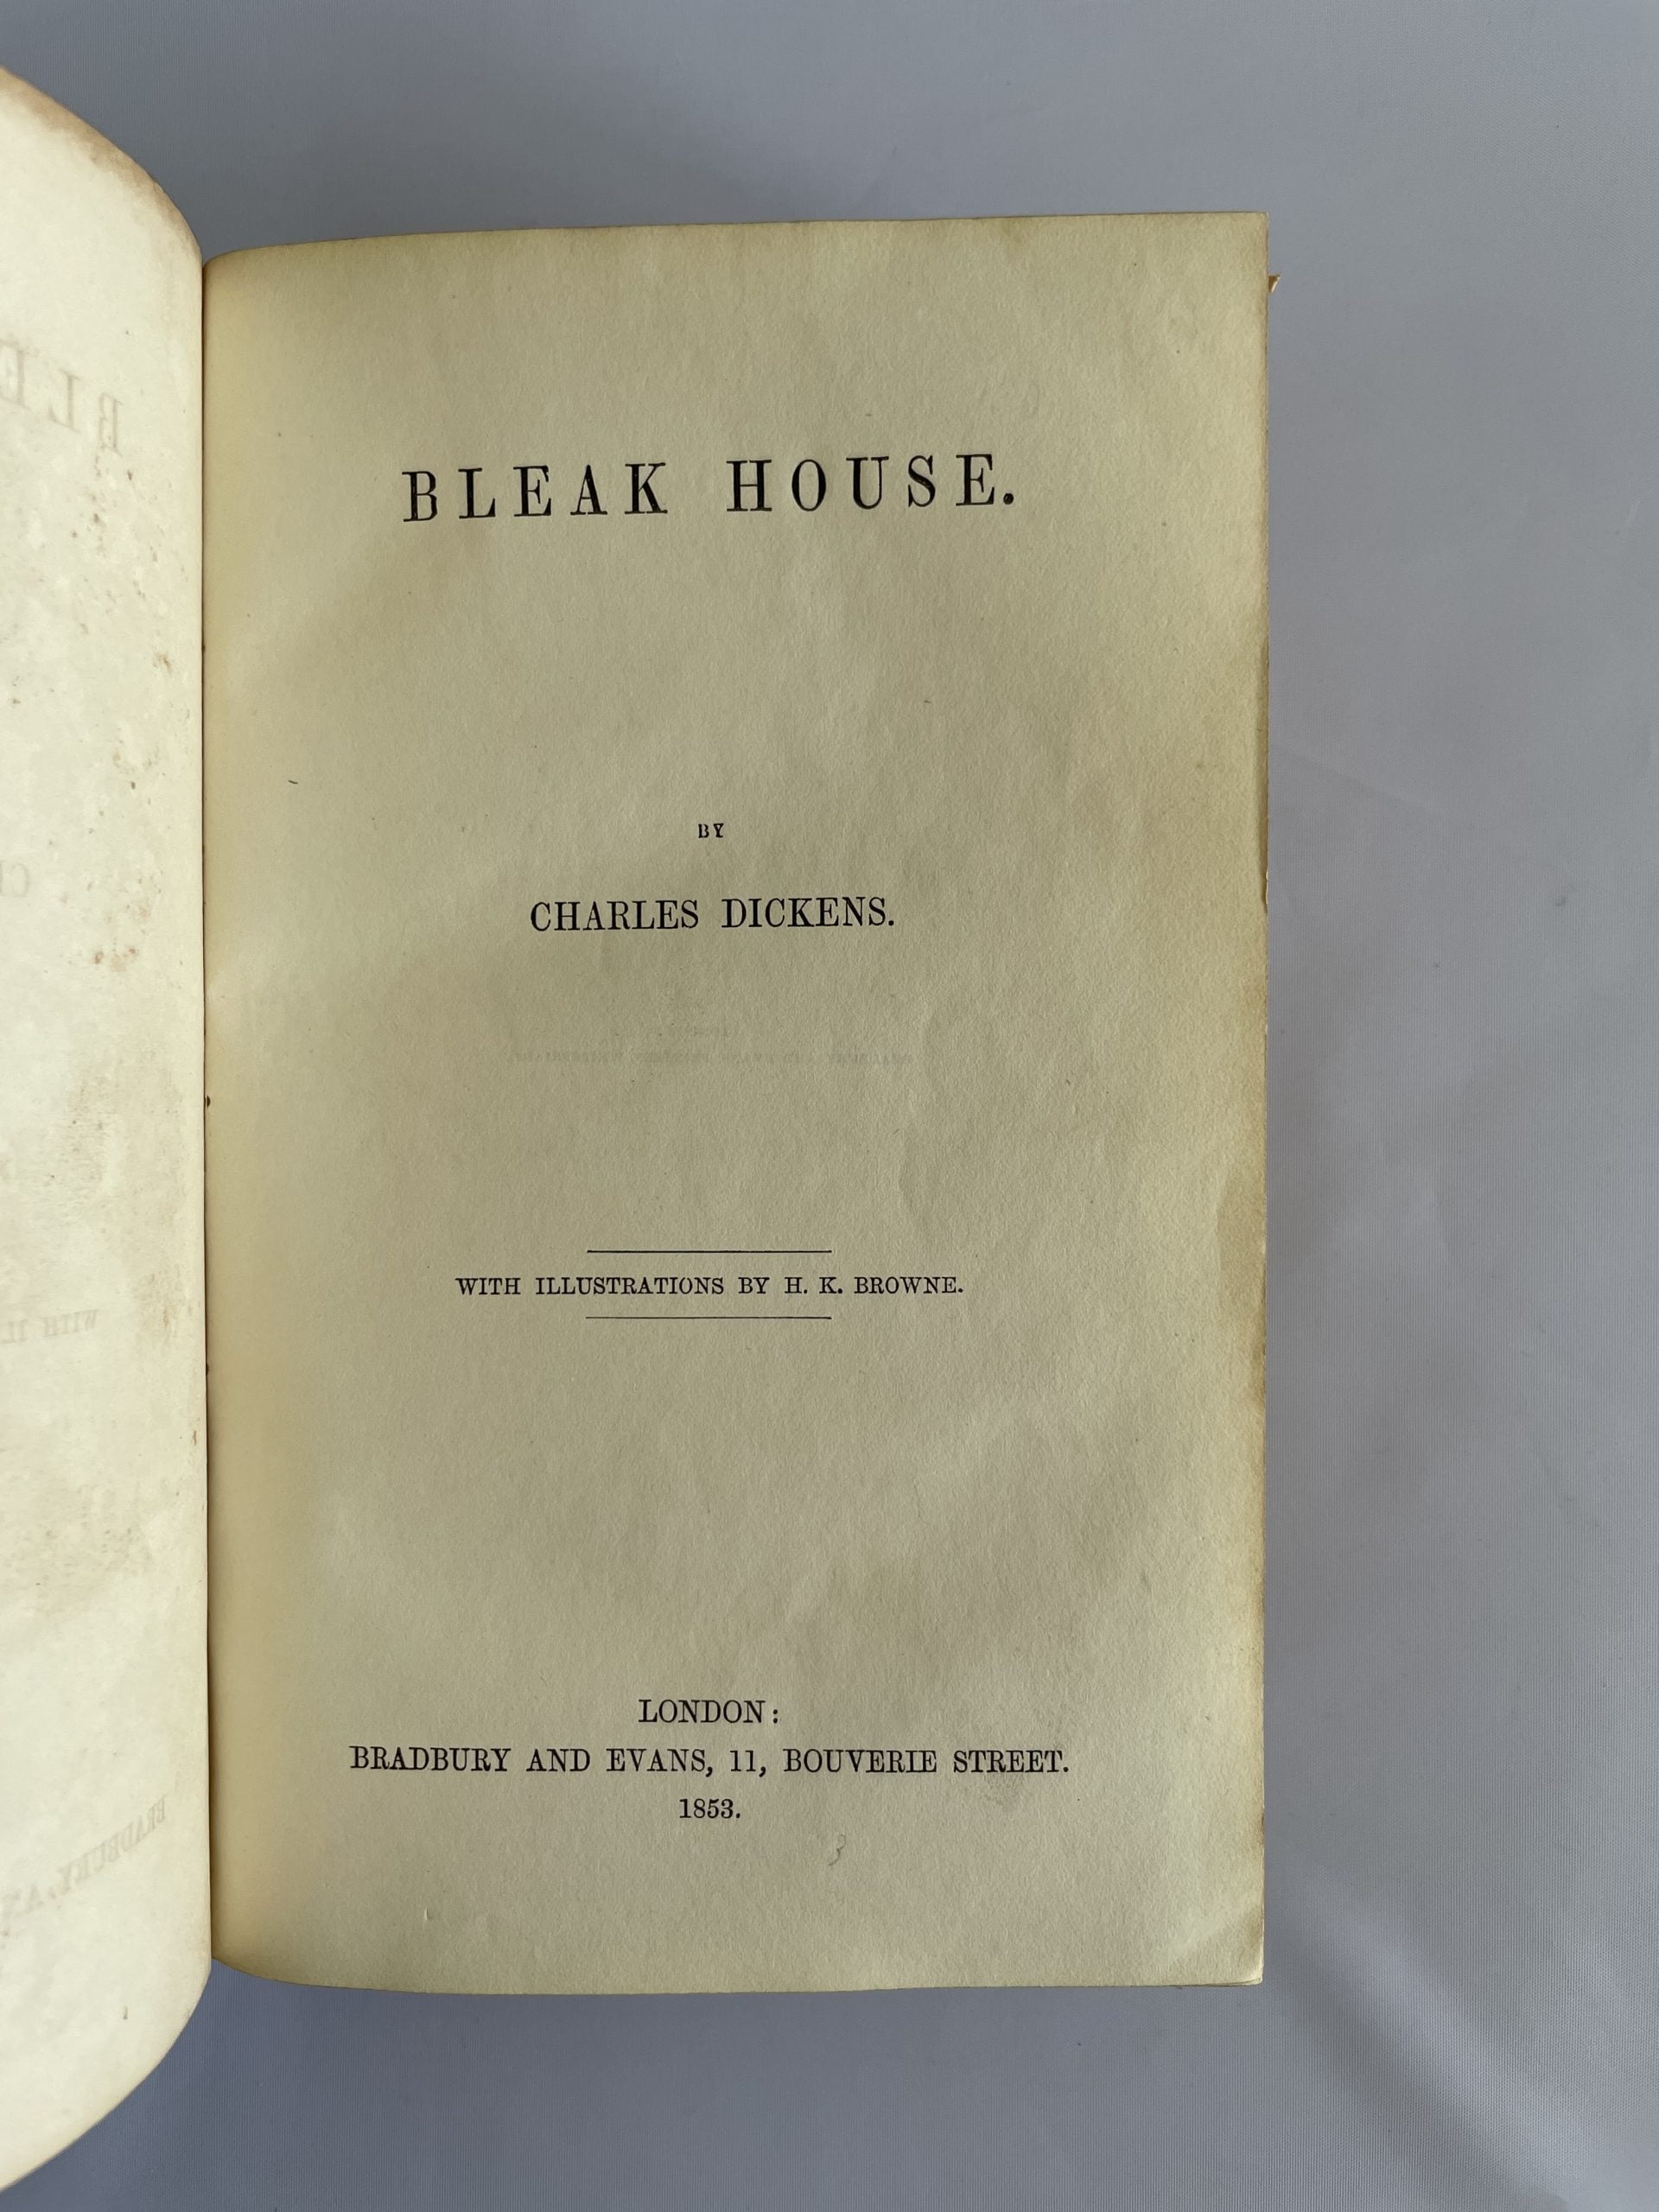 bleak house first edition